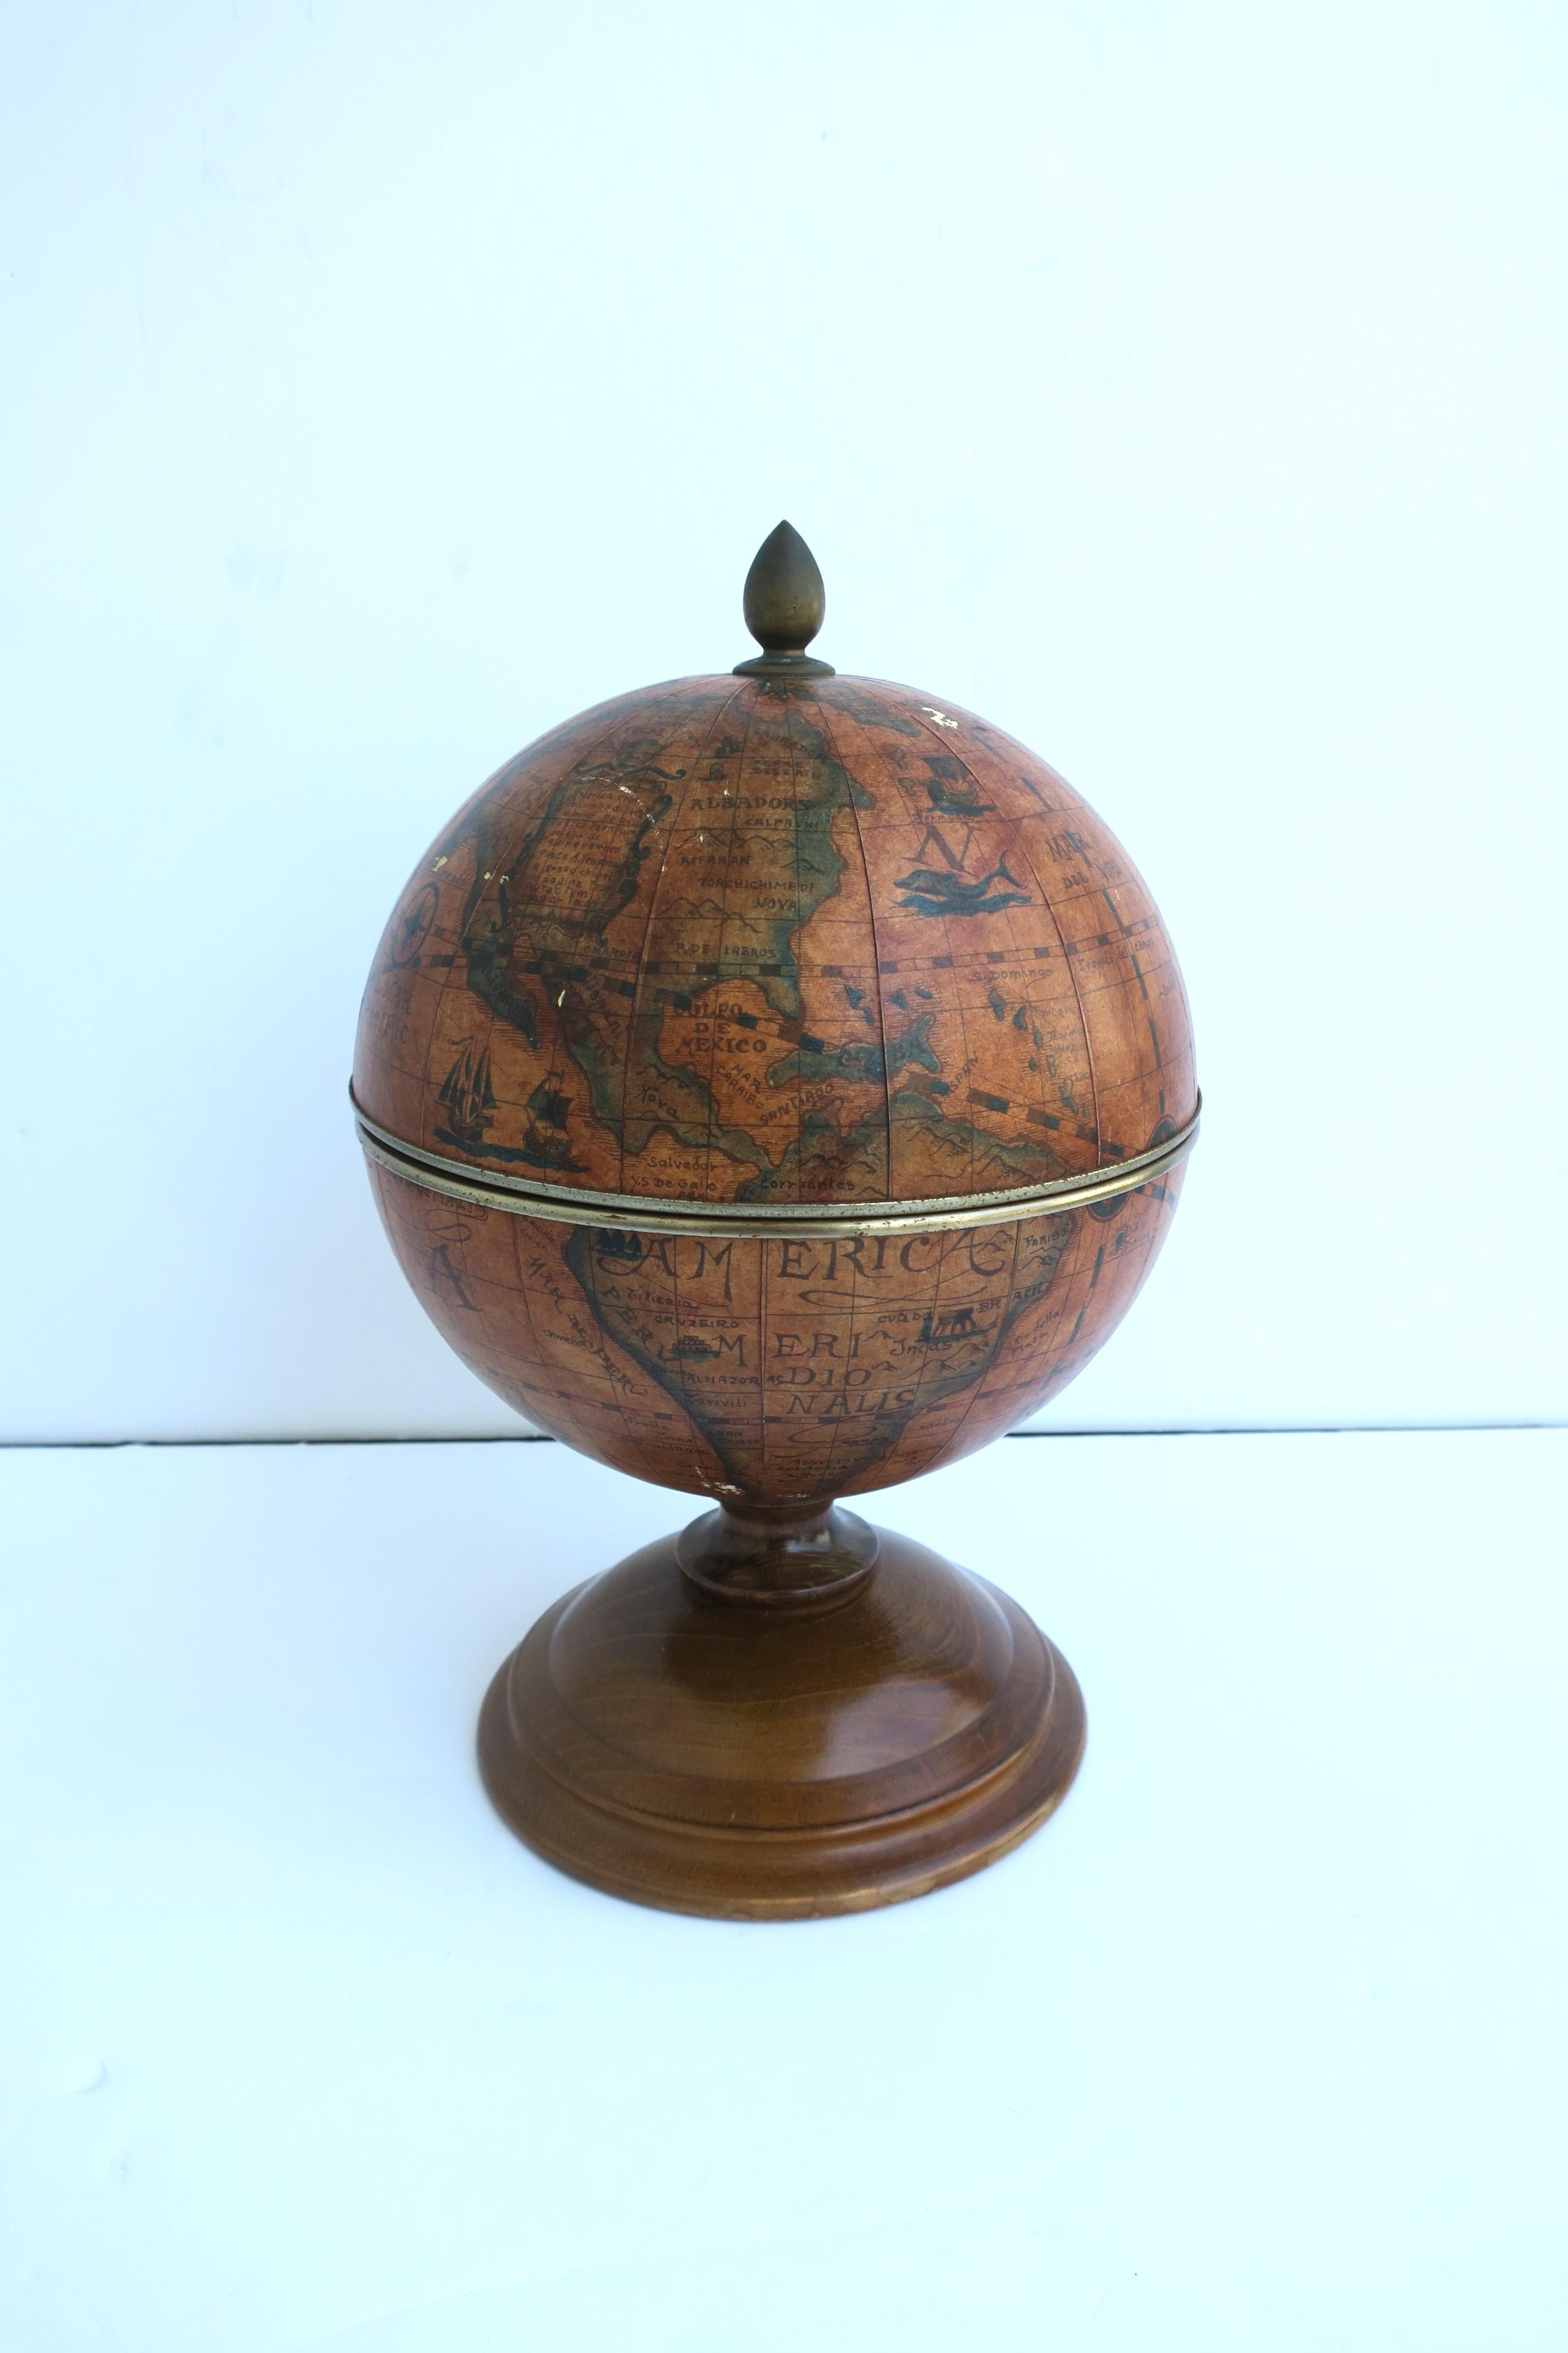 An Italian world globe ice bucket, Midcentury Modern design period, circa mid-20th century, Italy. Ice bucket has a brass finial top and a turned wood base. A great piece for entertaining, on a bar, bar cart, etc. 

